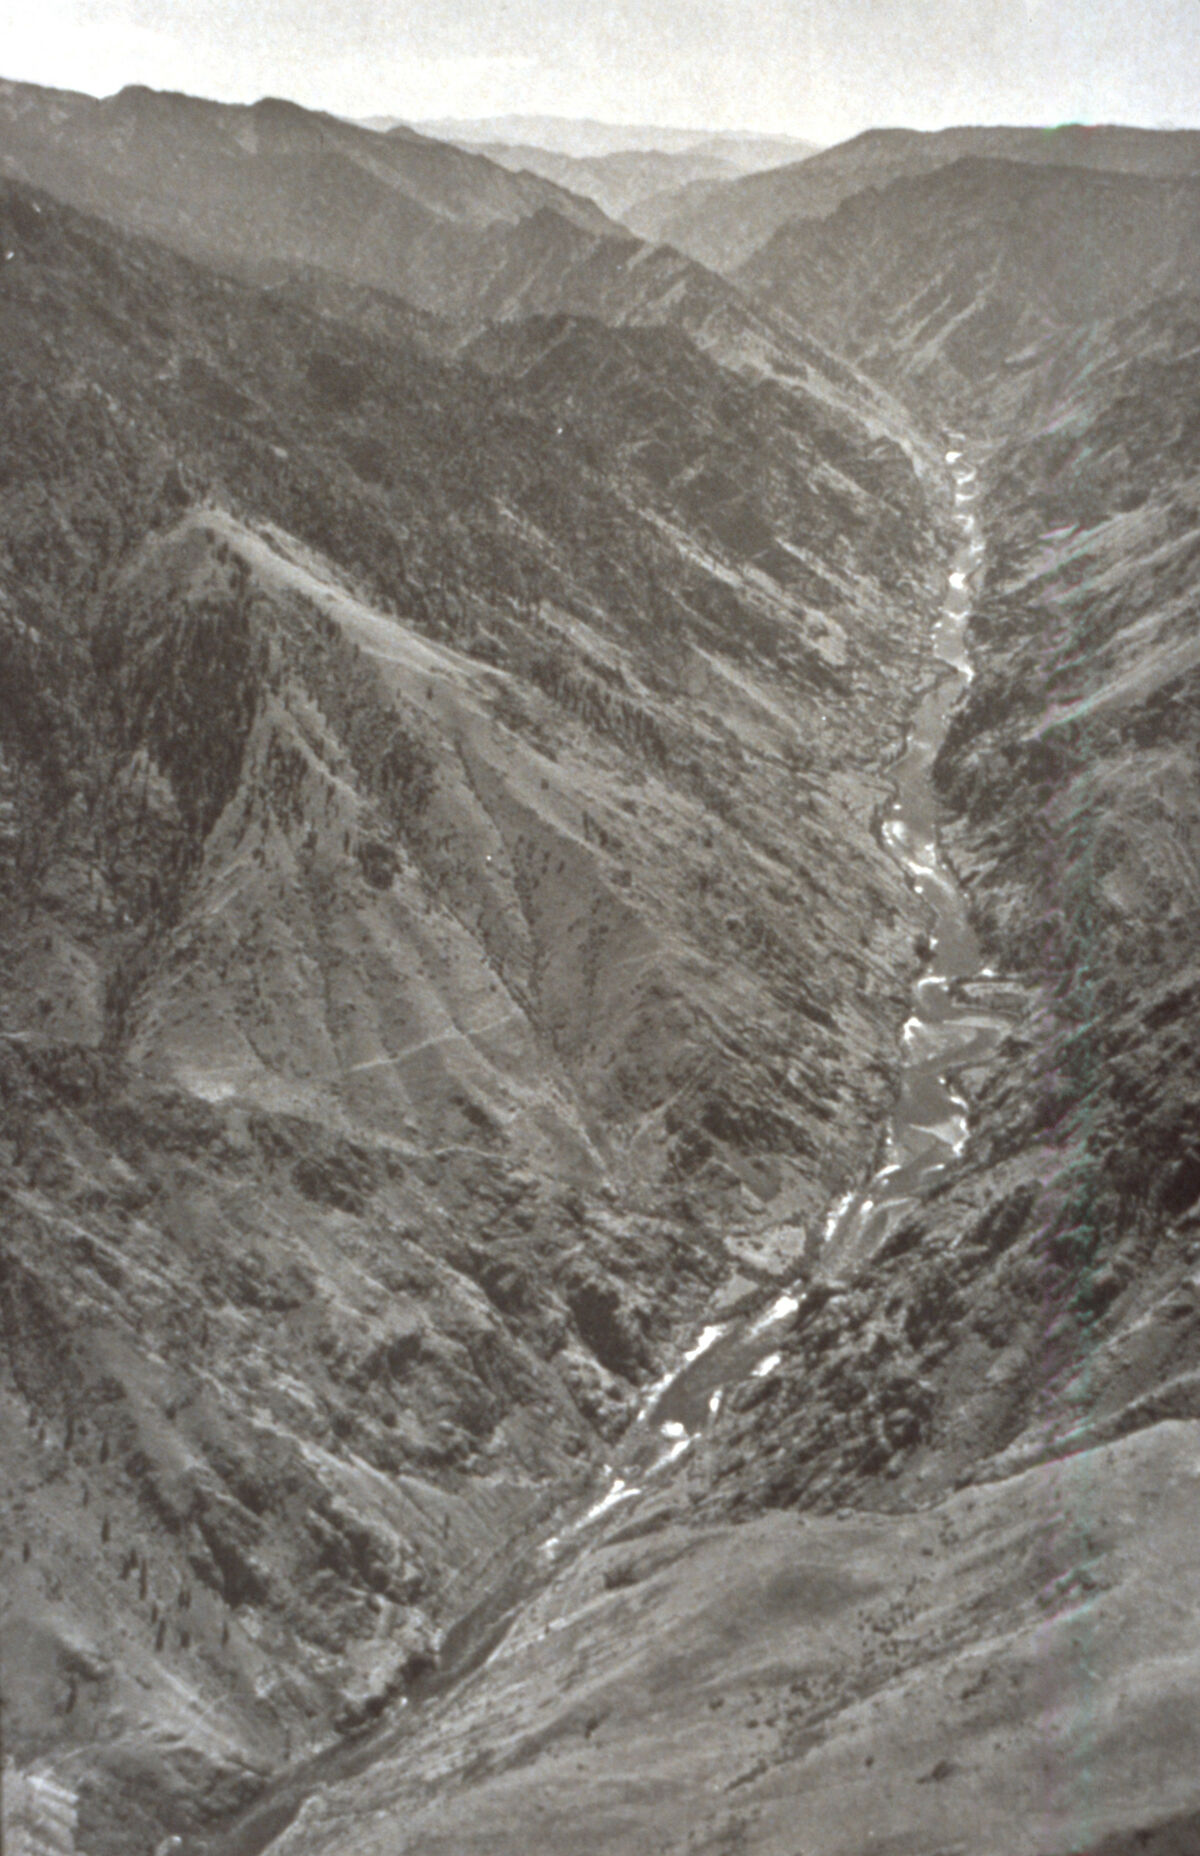 View looking down into Hells Canyon, from the Wallowa County Museum collection.